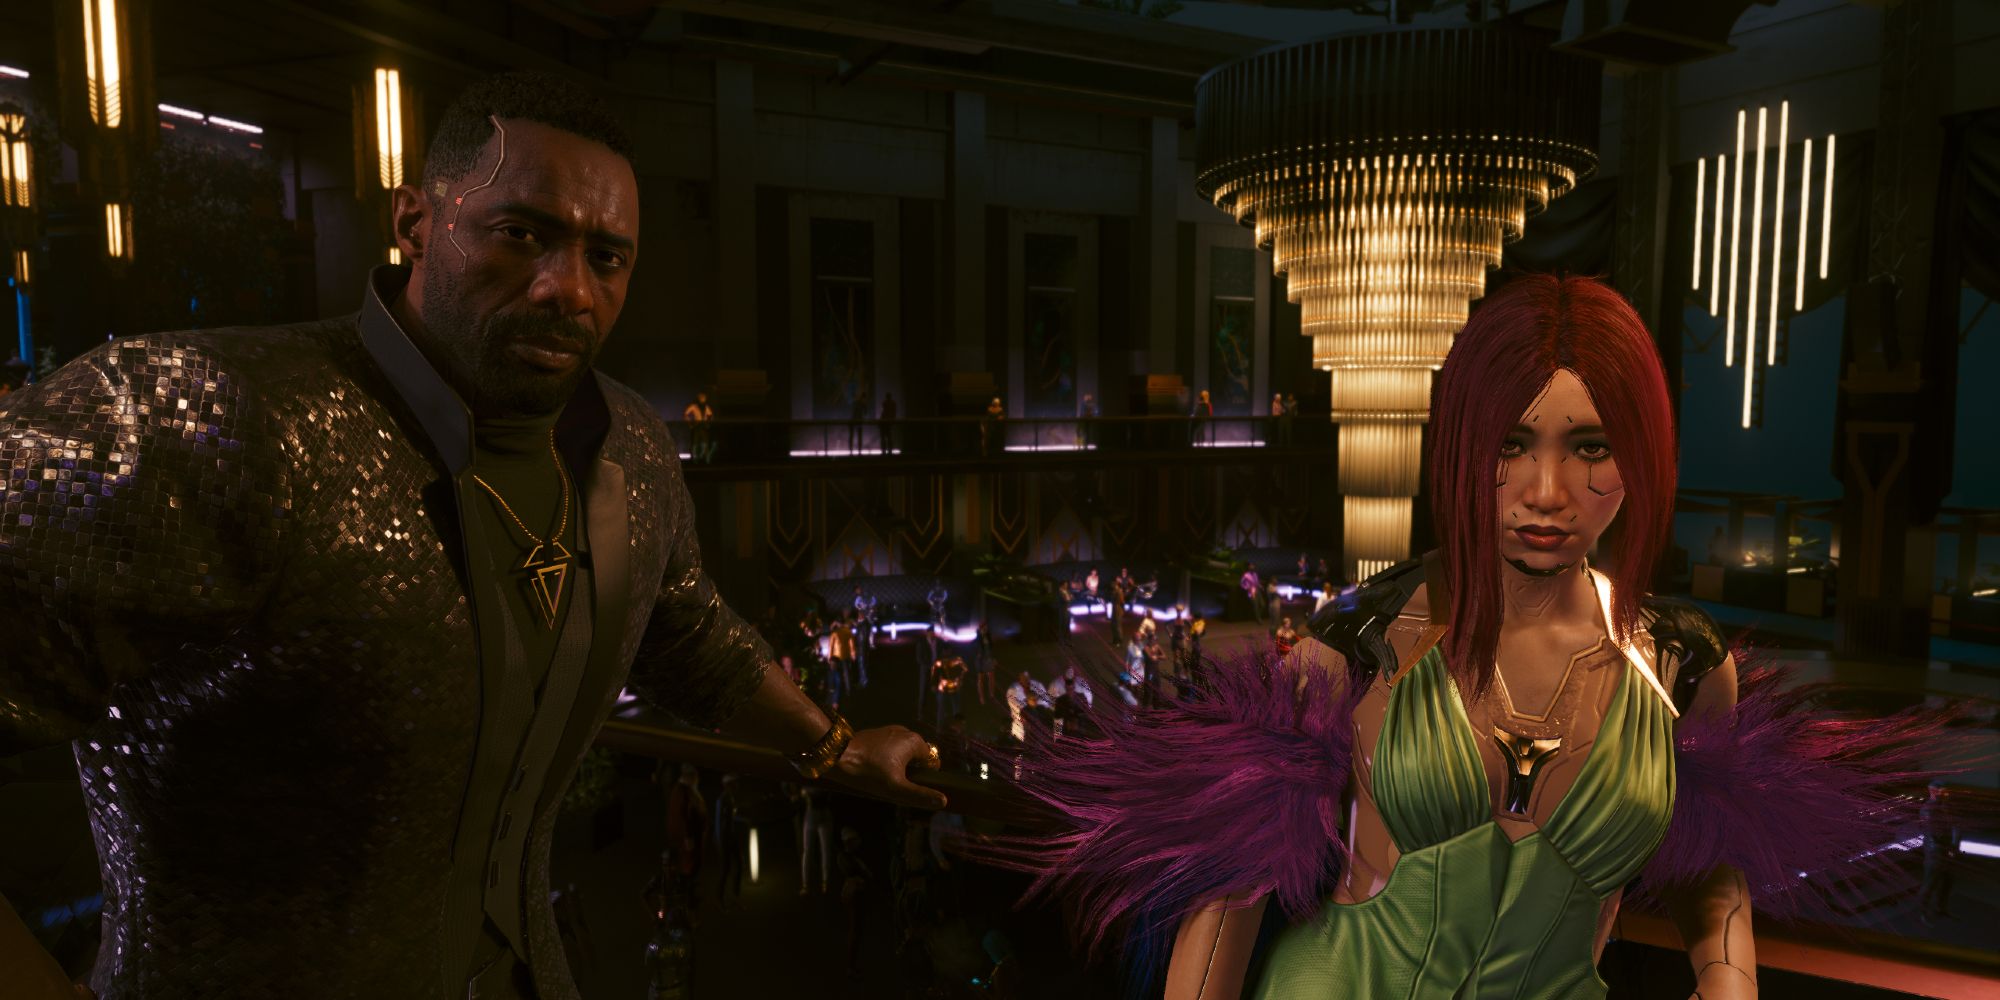 Solomon Reed and Songbird at the Black Diamond in Cyberpunk 2077.